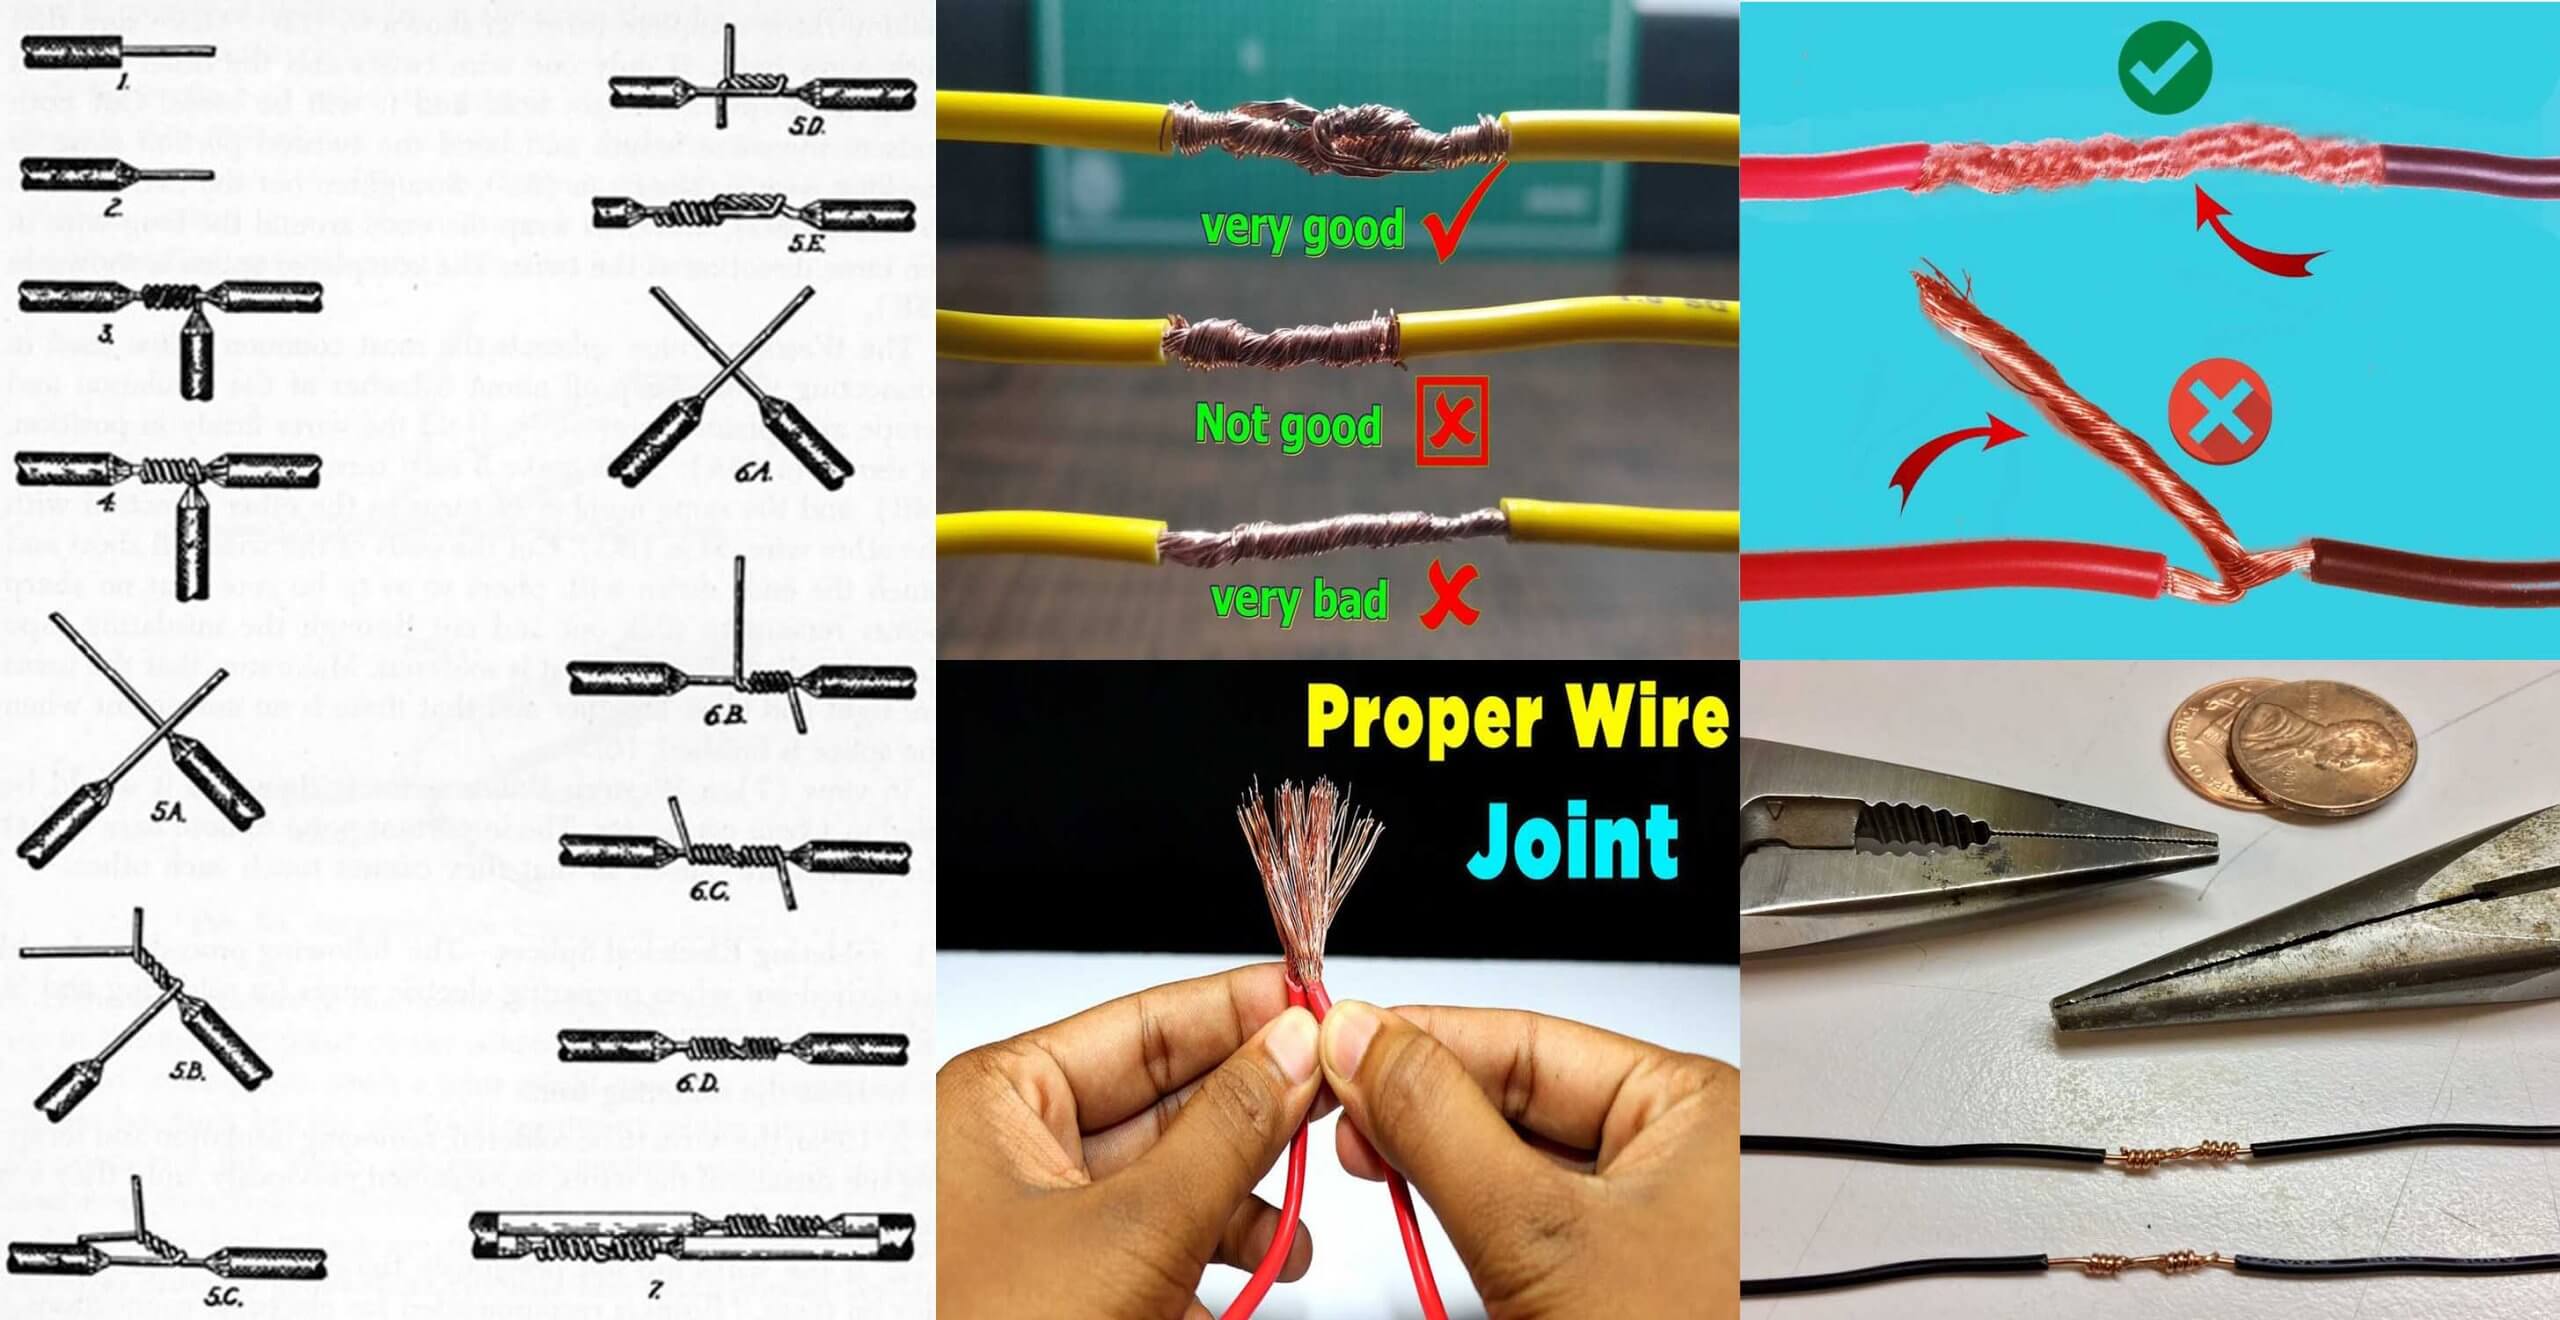 What Are The Types Of Joint In Welding - Design Talk